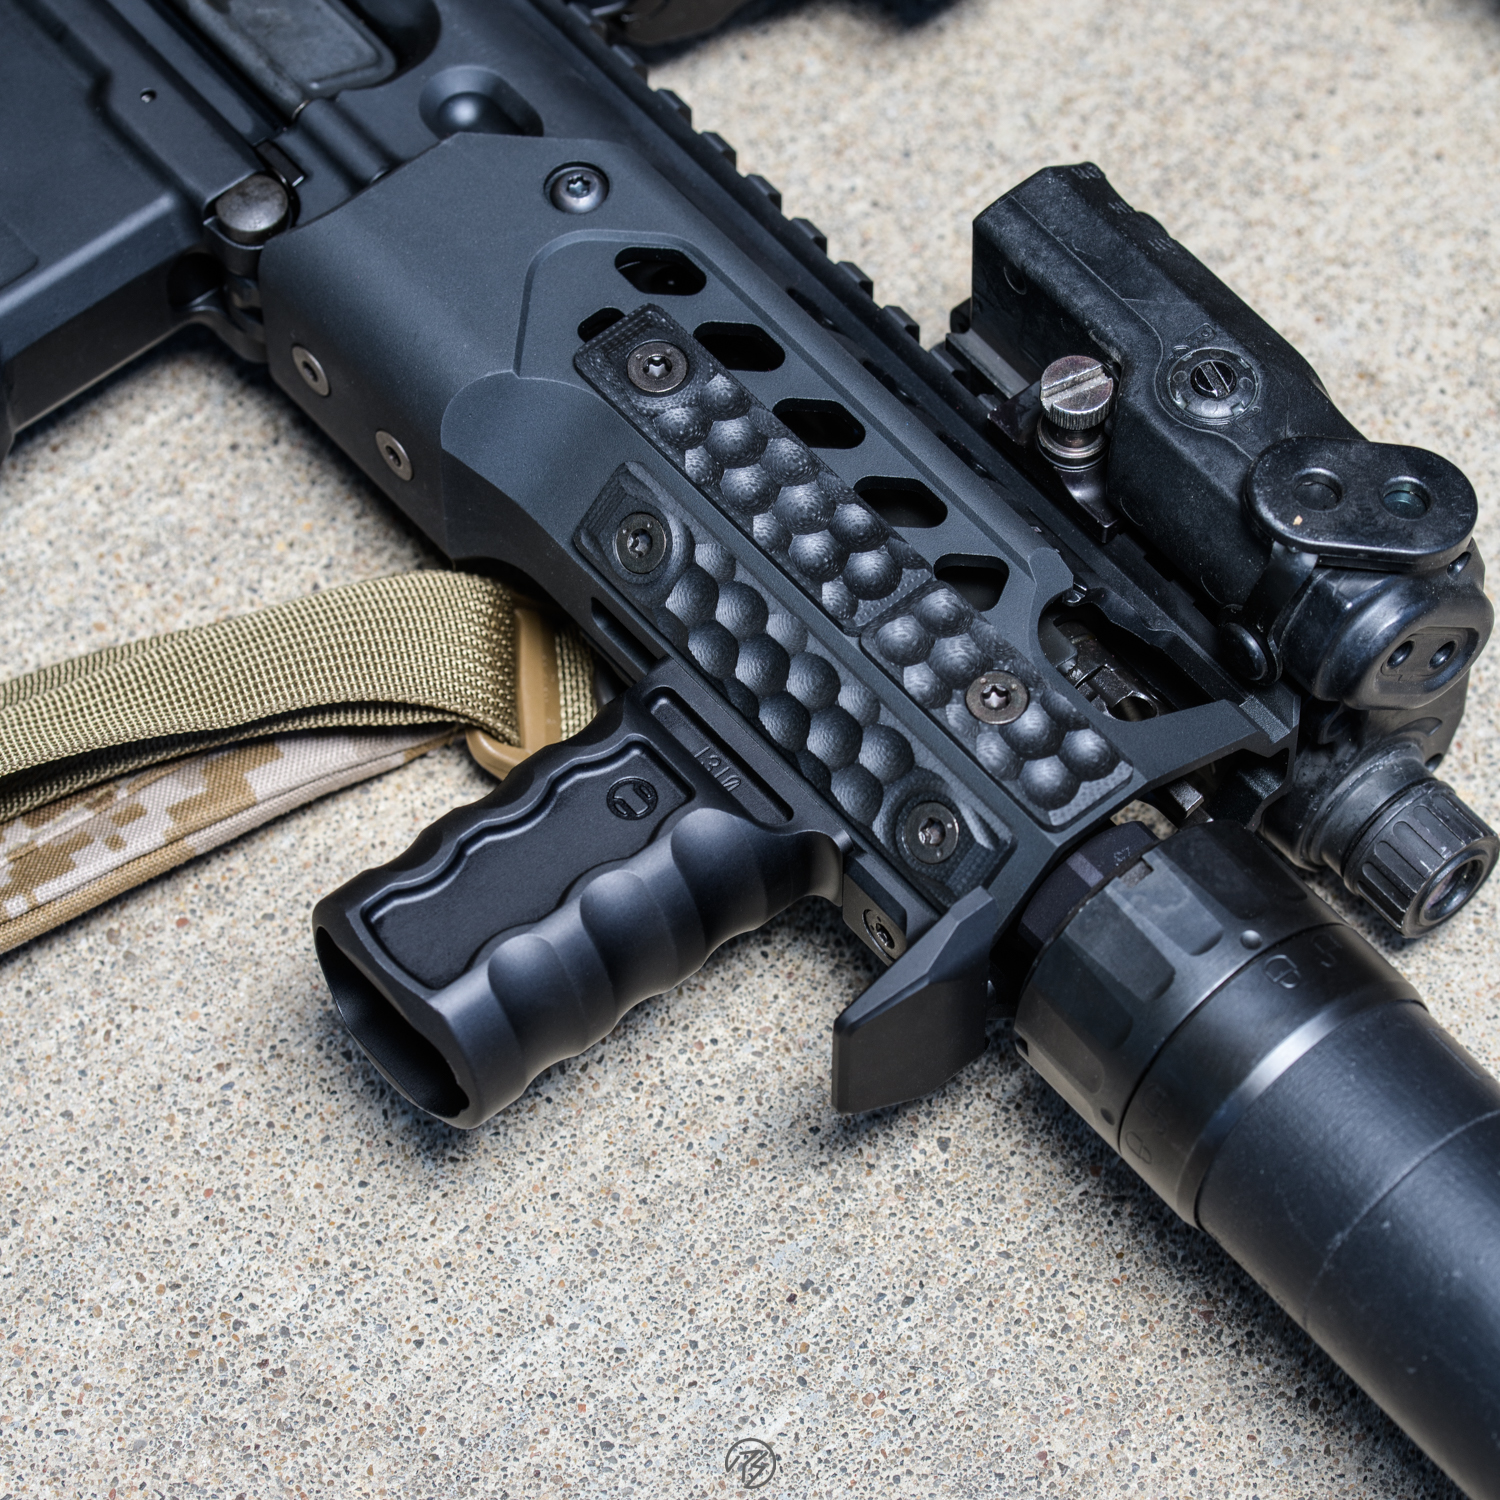 Choose RailScales Accessories This Holiday Season For AR Owners ...